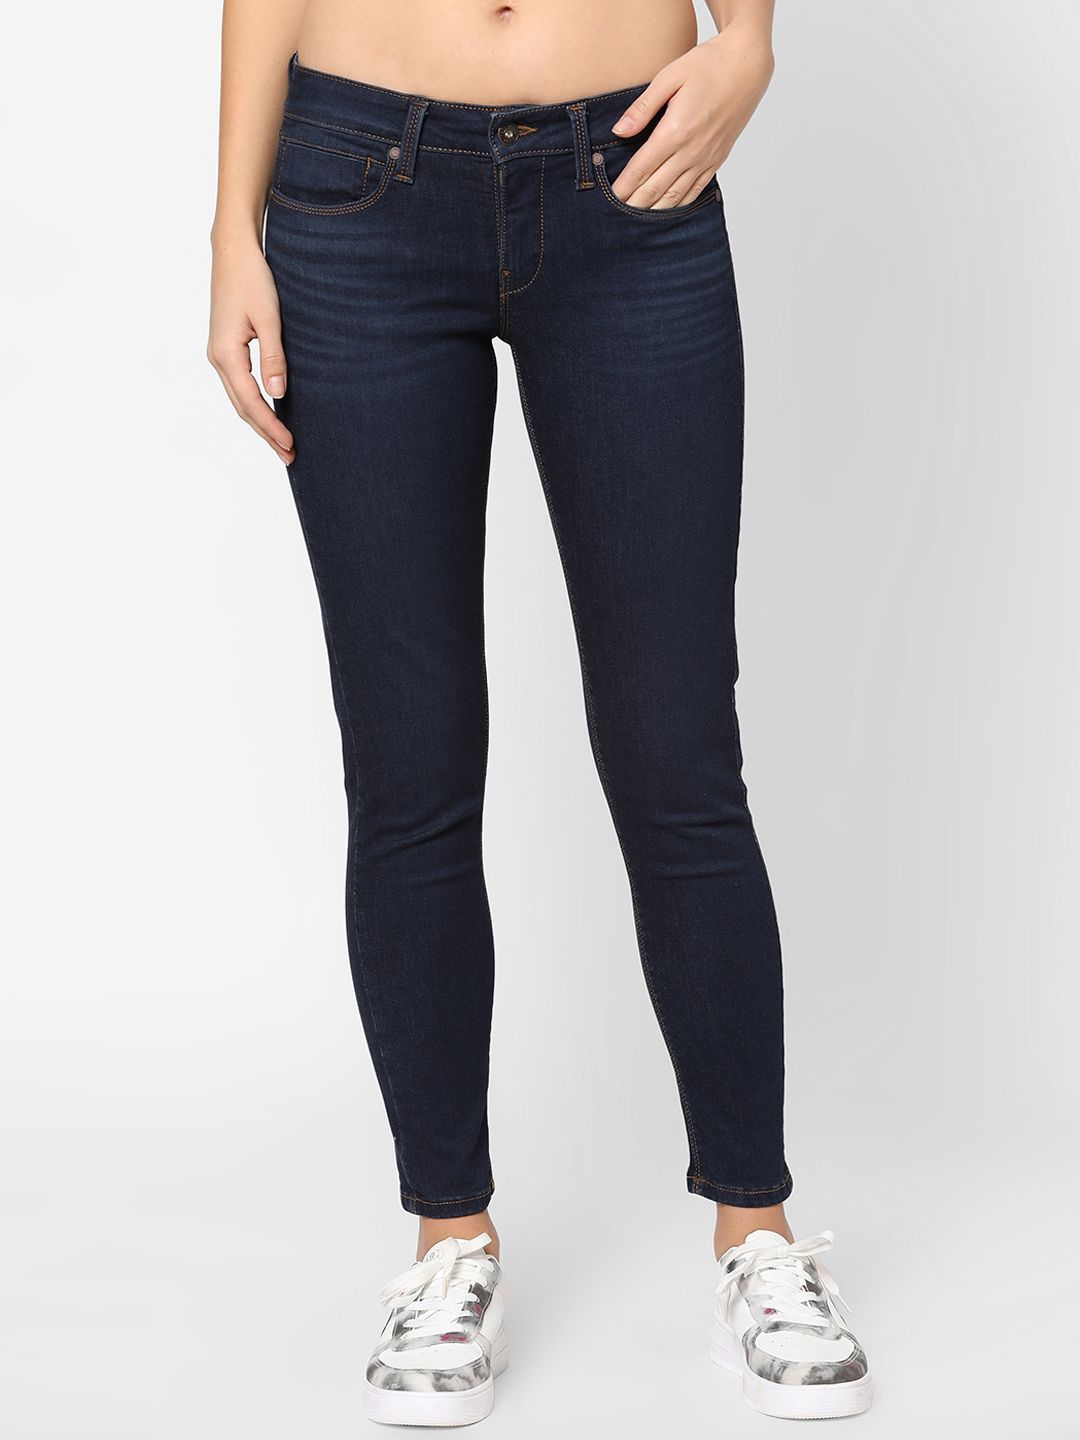 Pepe Jeans Women Blue Jeans Price in India